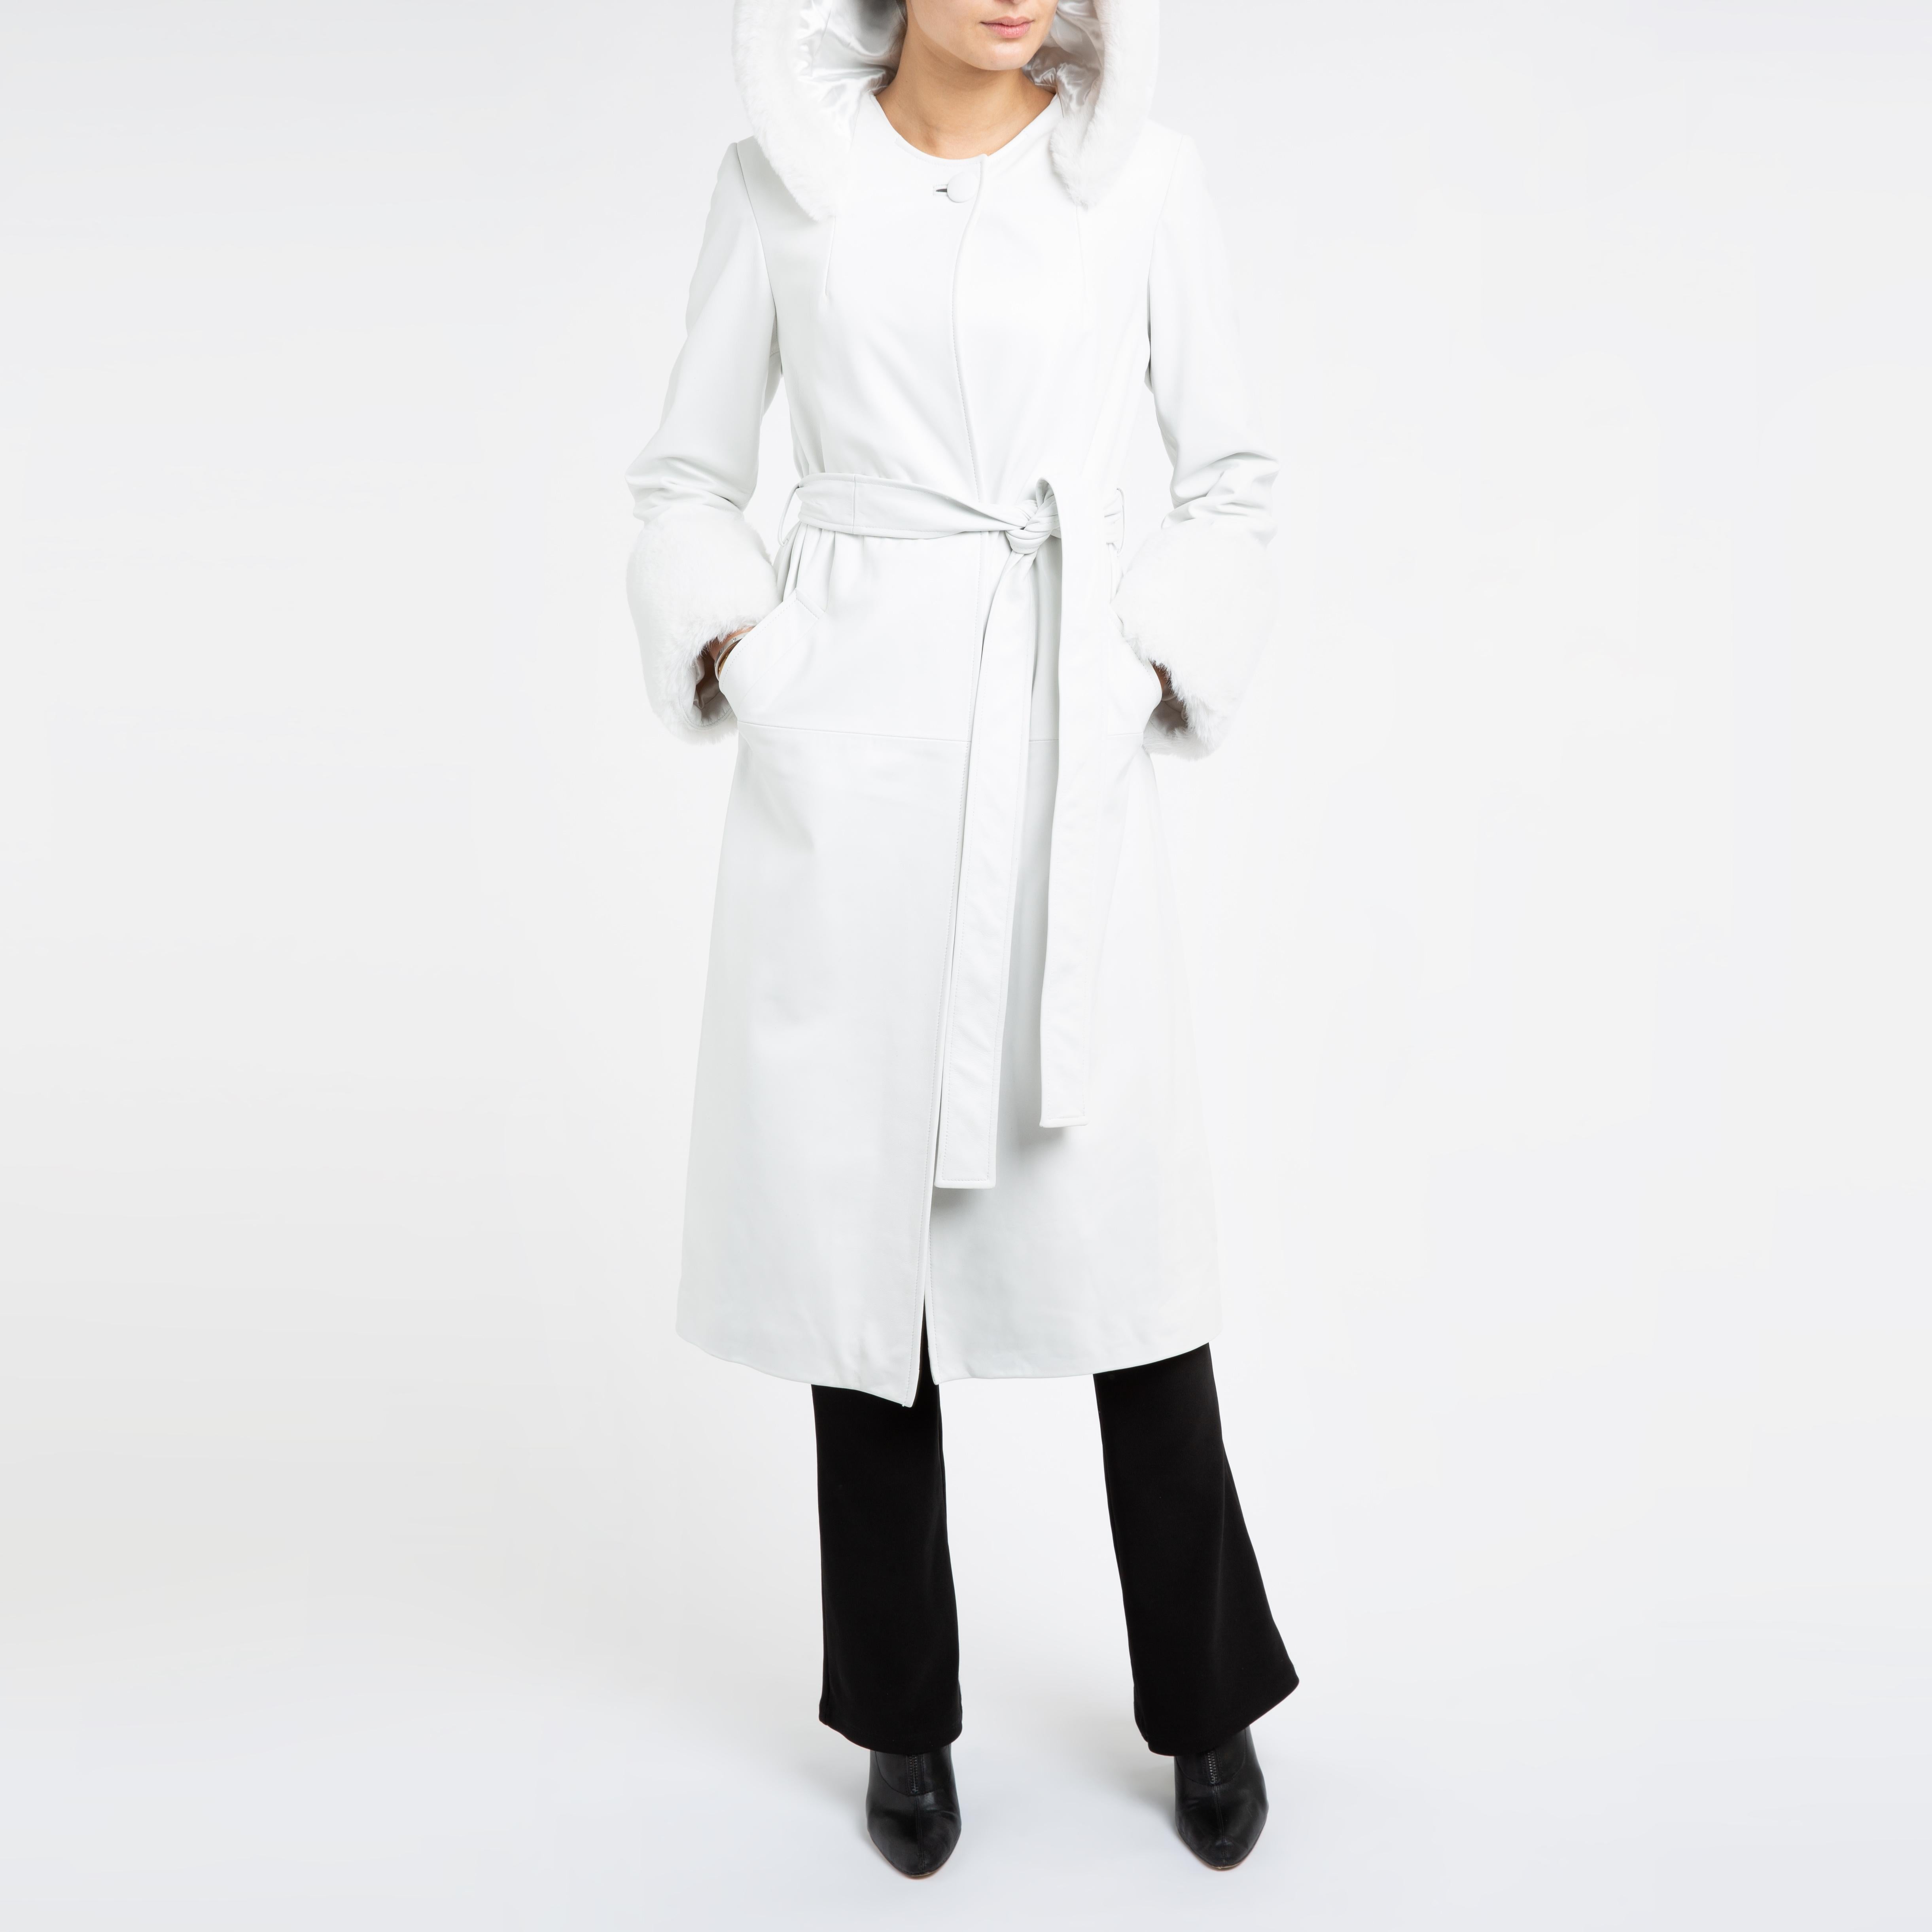 Verheyen Aurora Hooded Leather Trench Coat in White with Faux Fur - Size uk 16 For Sale 7